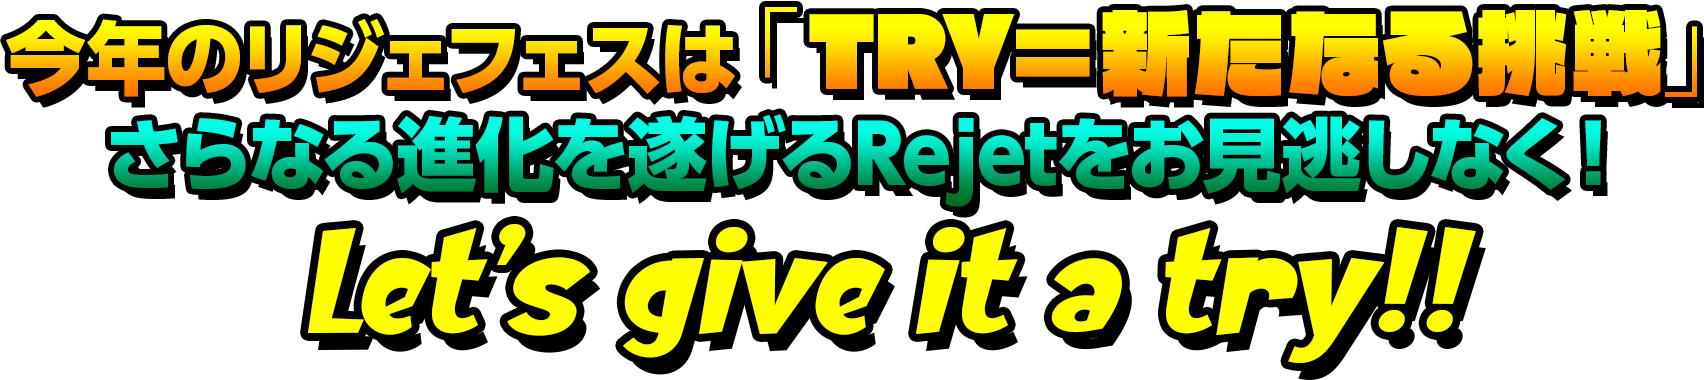 RejetFes.2021 TRY!